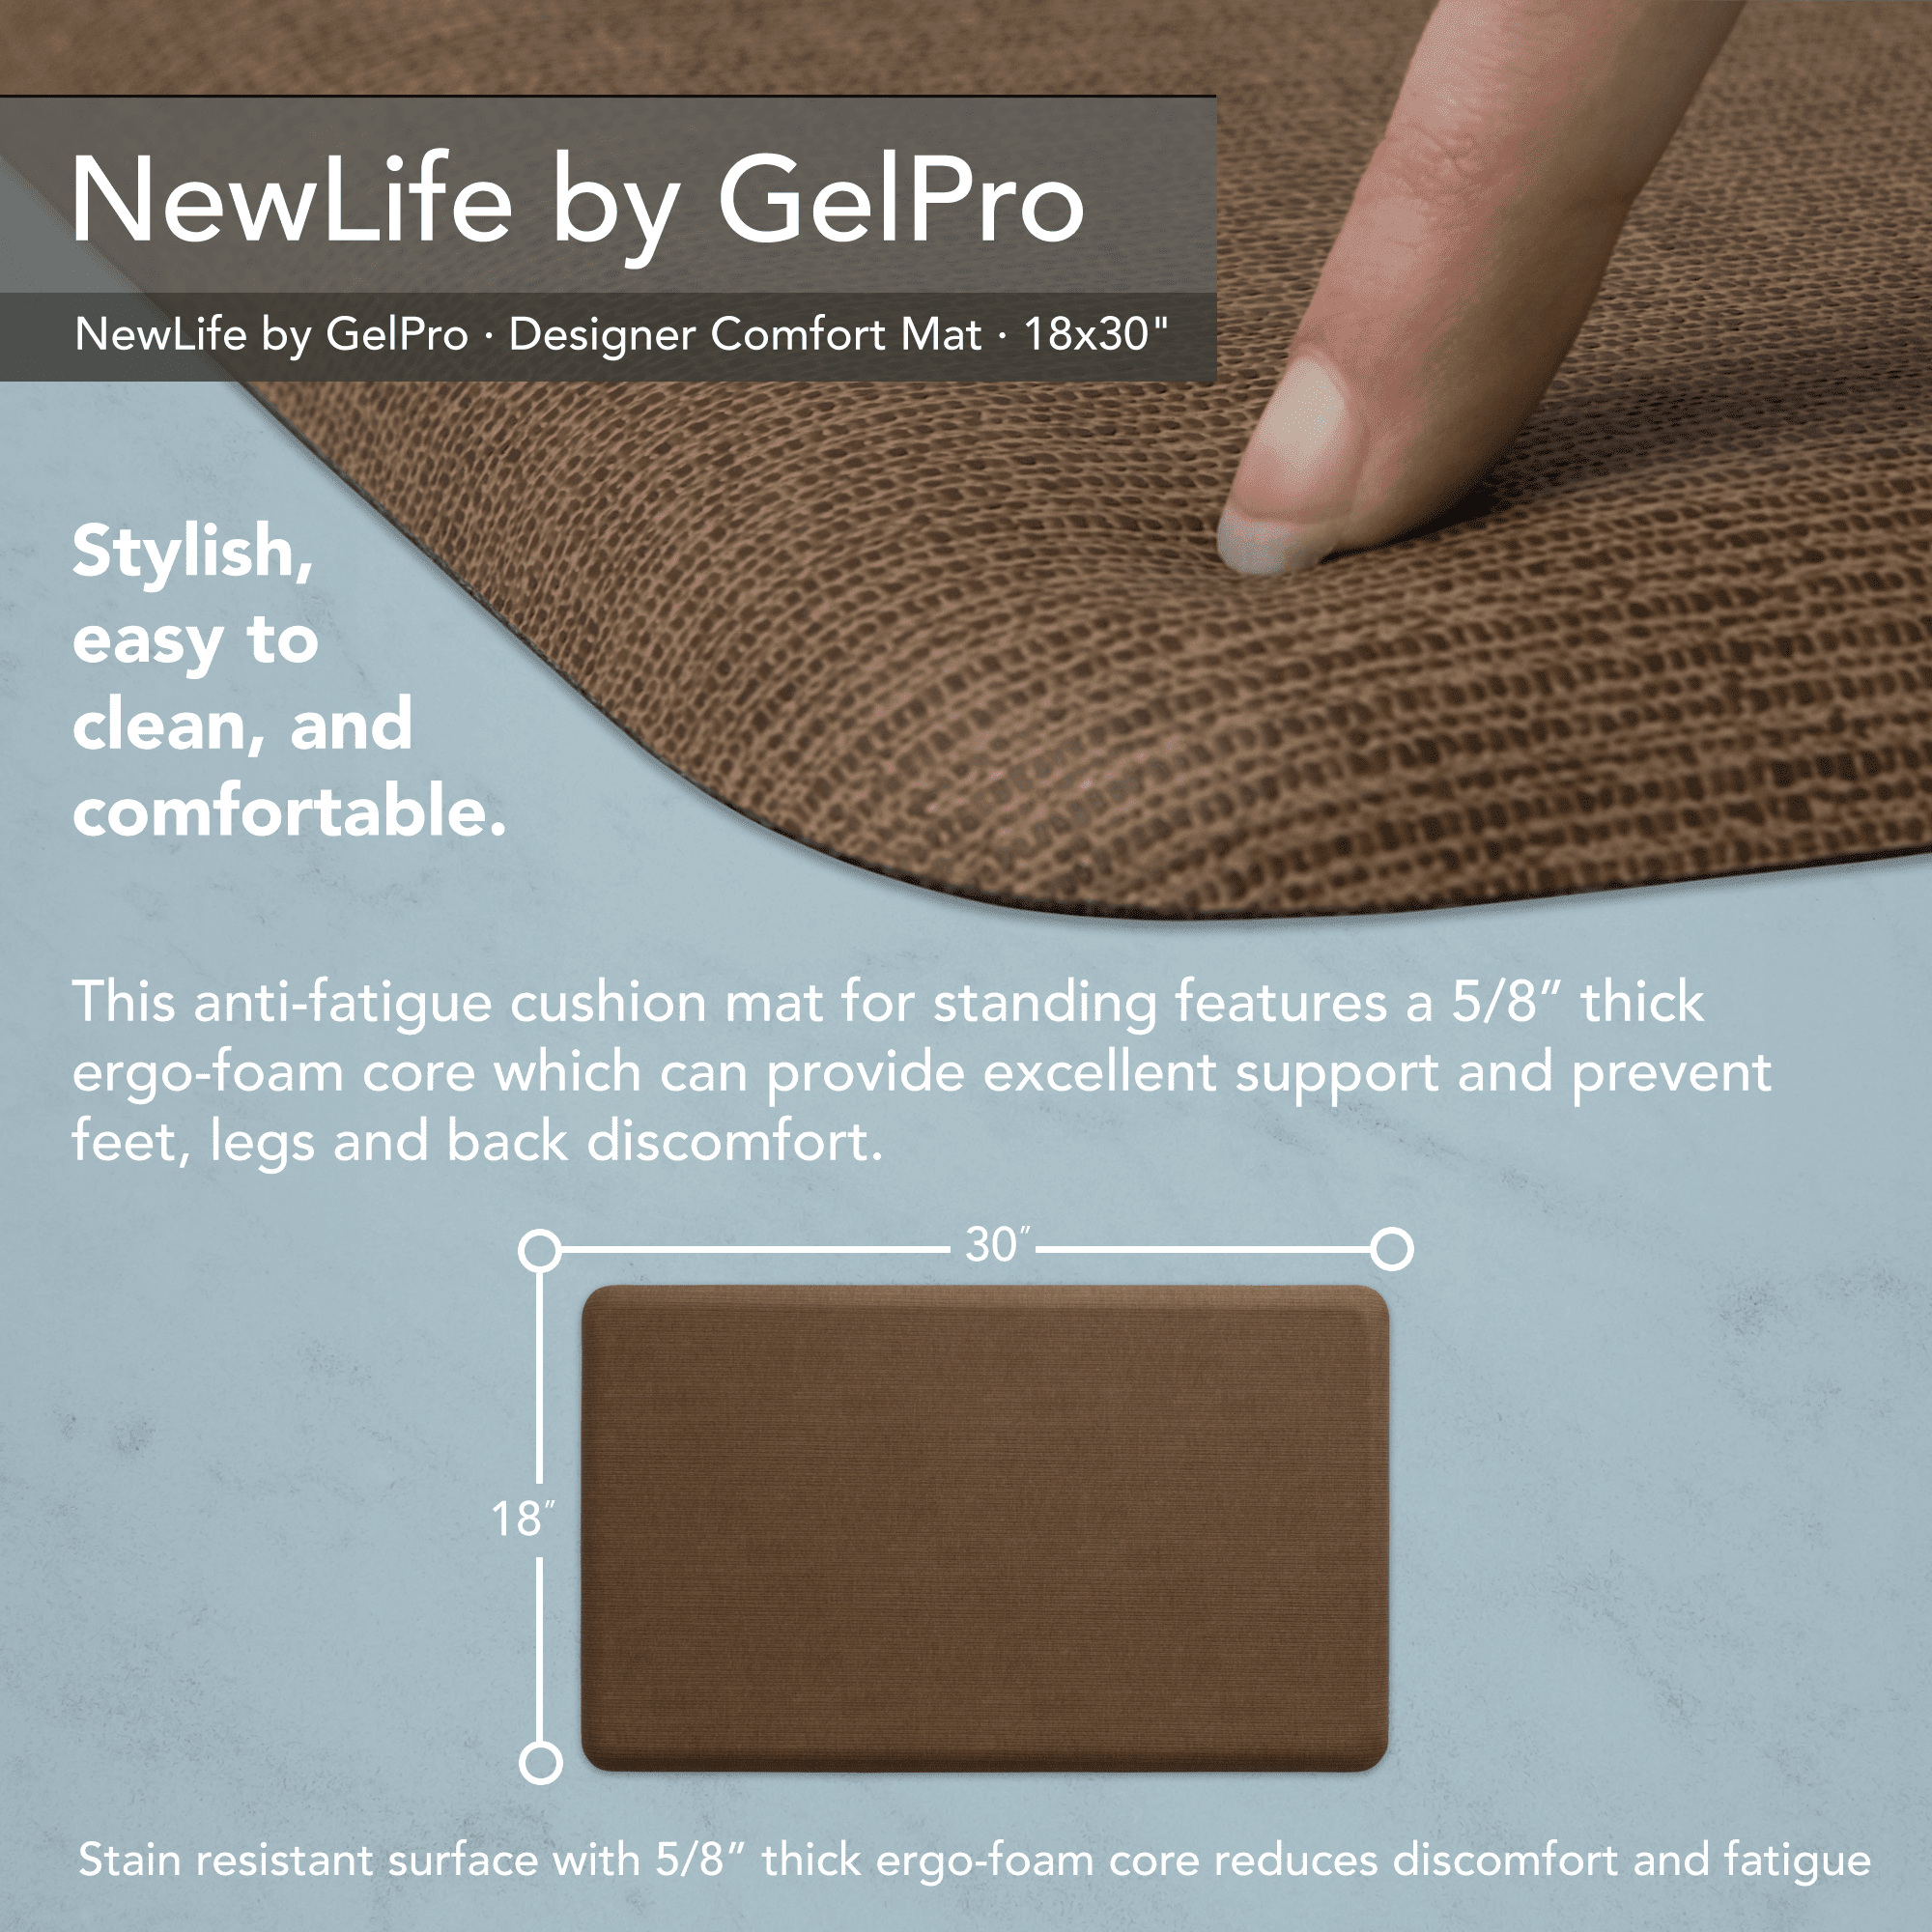 NewLife by GelPro Anti-Fatigue Designer Comfort Kitchen Floor Mat Stain Resistant Surface with 5/8” thick ergo-foam core for health and wellness,18x30 Grasscloth Charcoal 